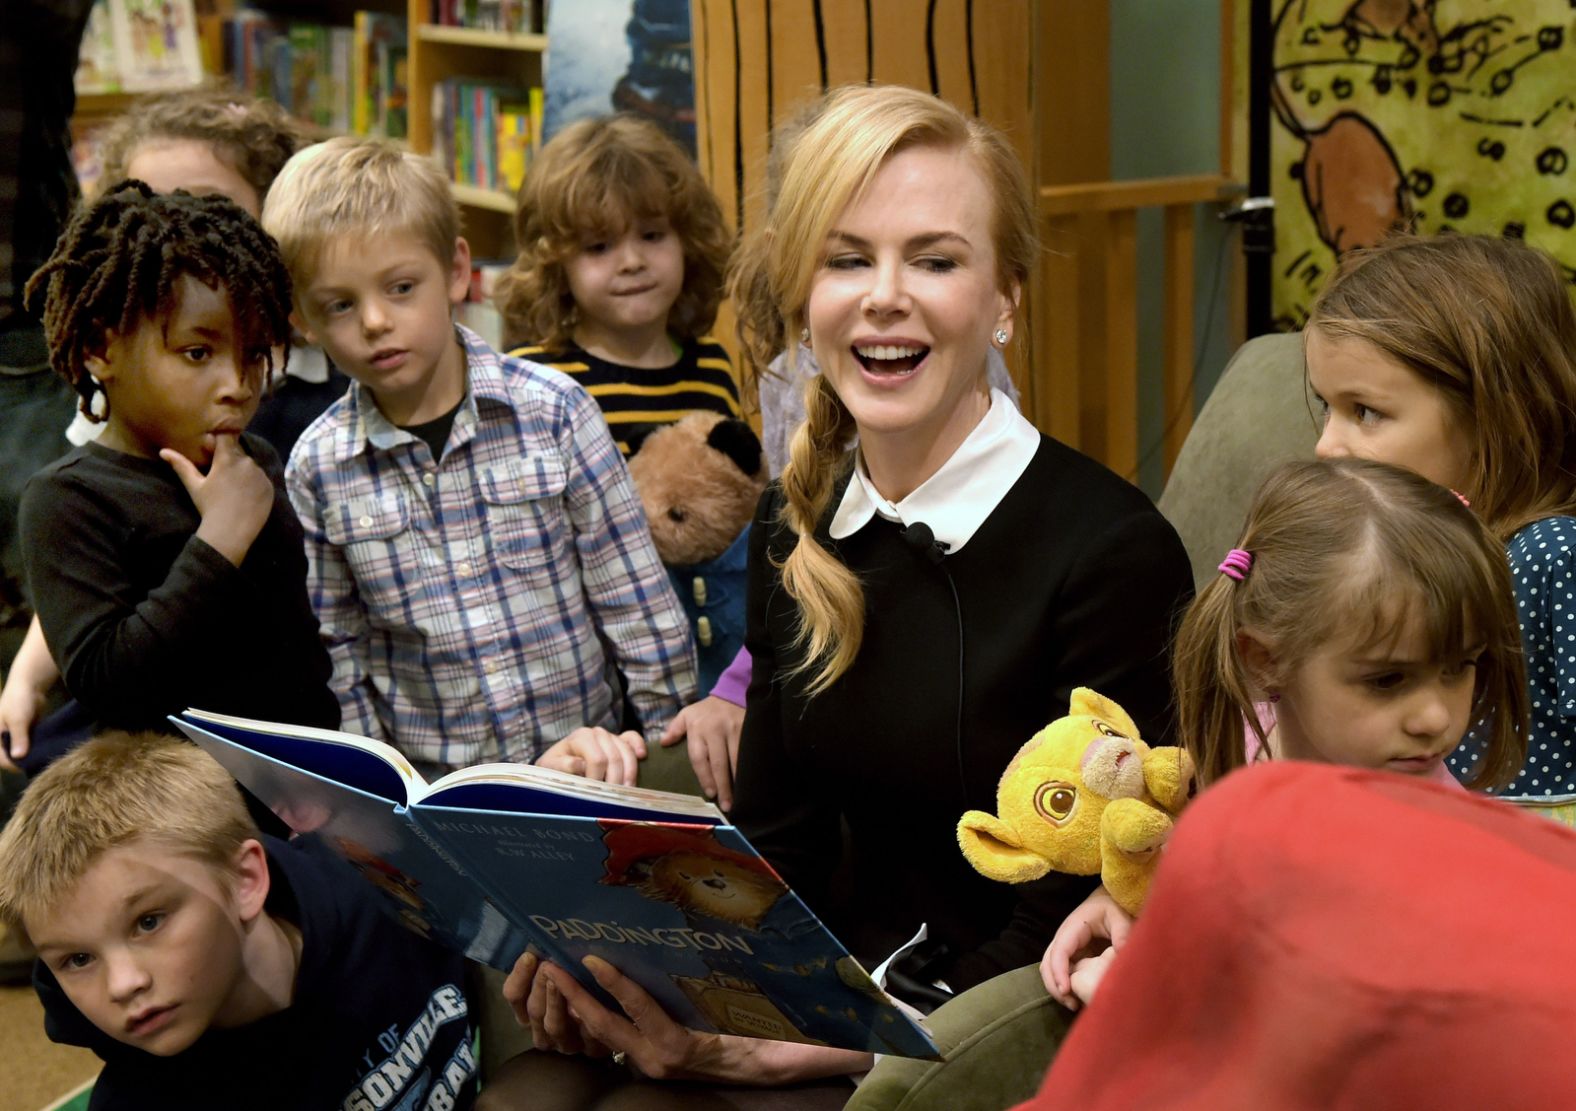 Kidman reads "Paddington Storytime" to children in Brentwood, Tennessee, in 2014. She starred in the film "Paddington" that year.